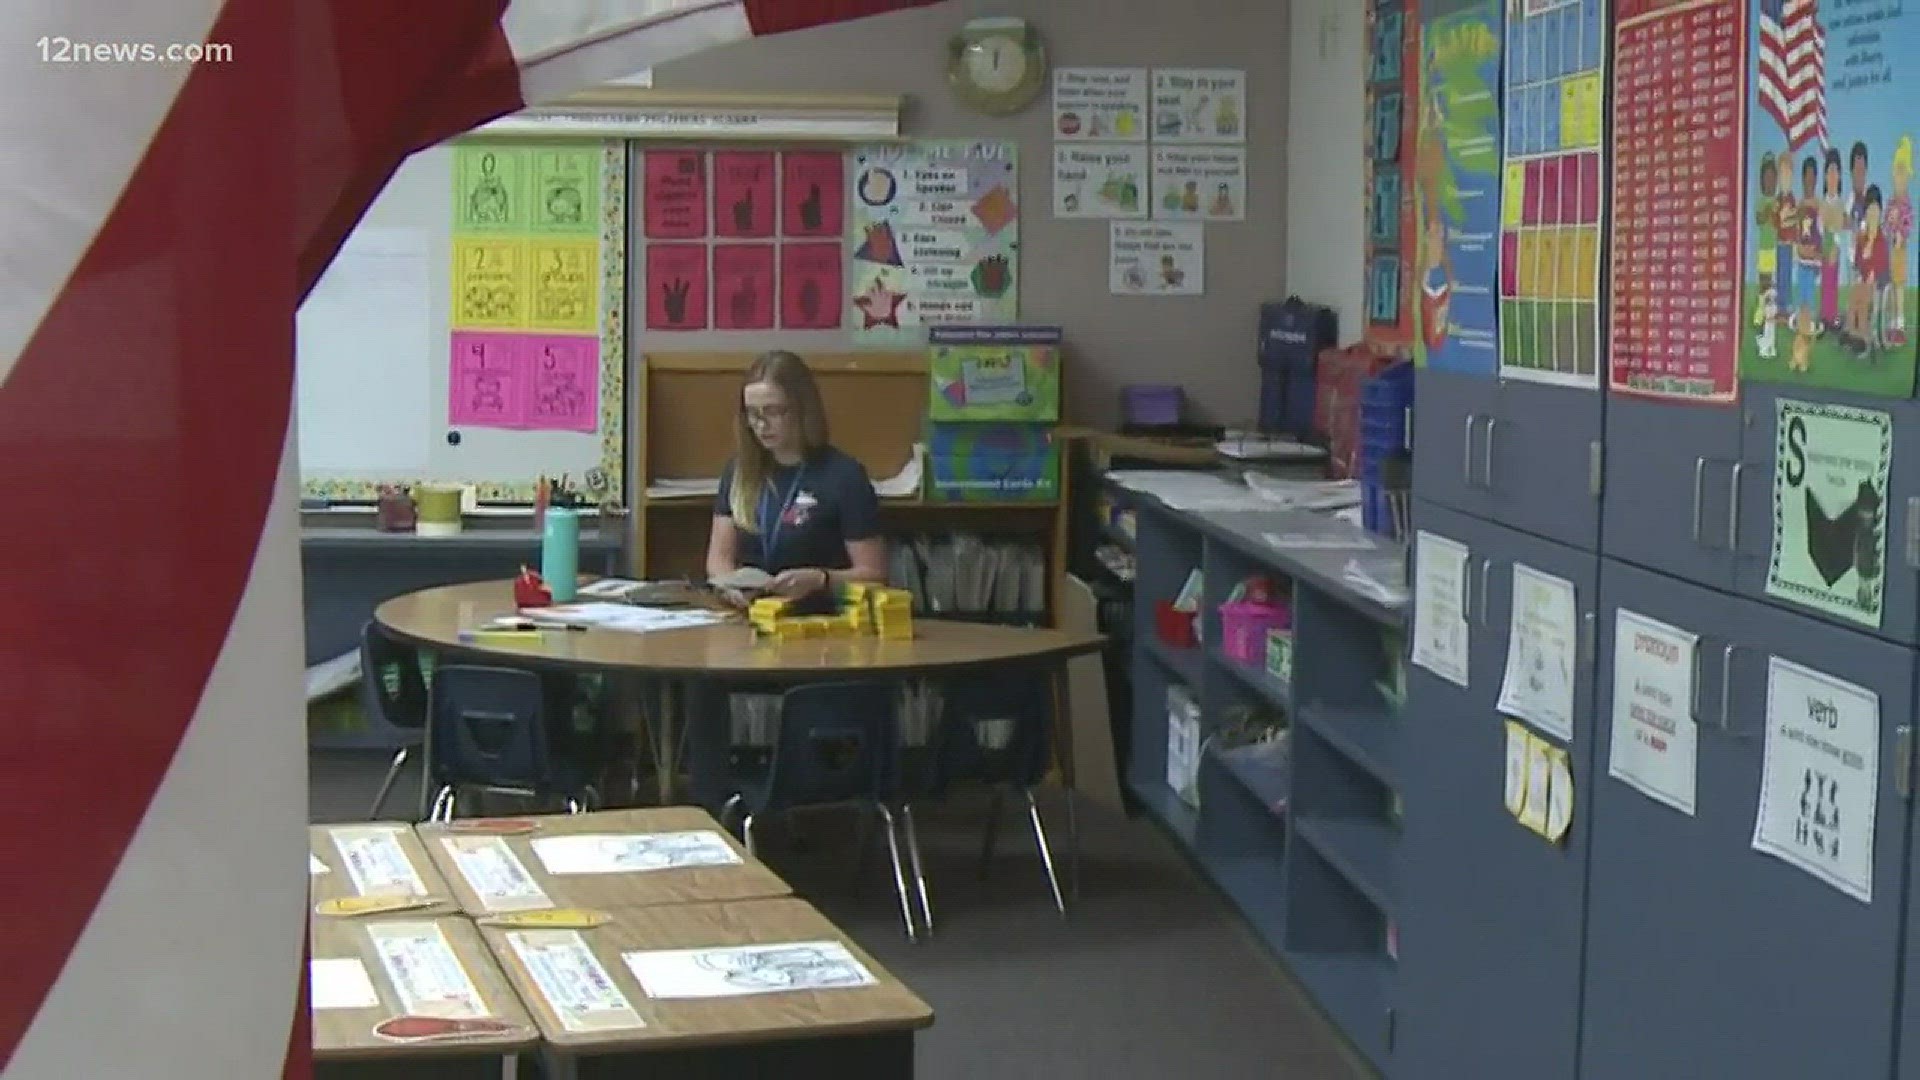 A recent survey showed school districts are having a harder time retaining teachers in Arizona.